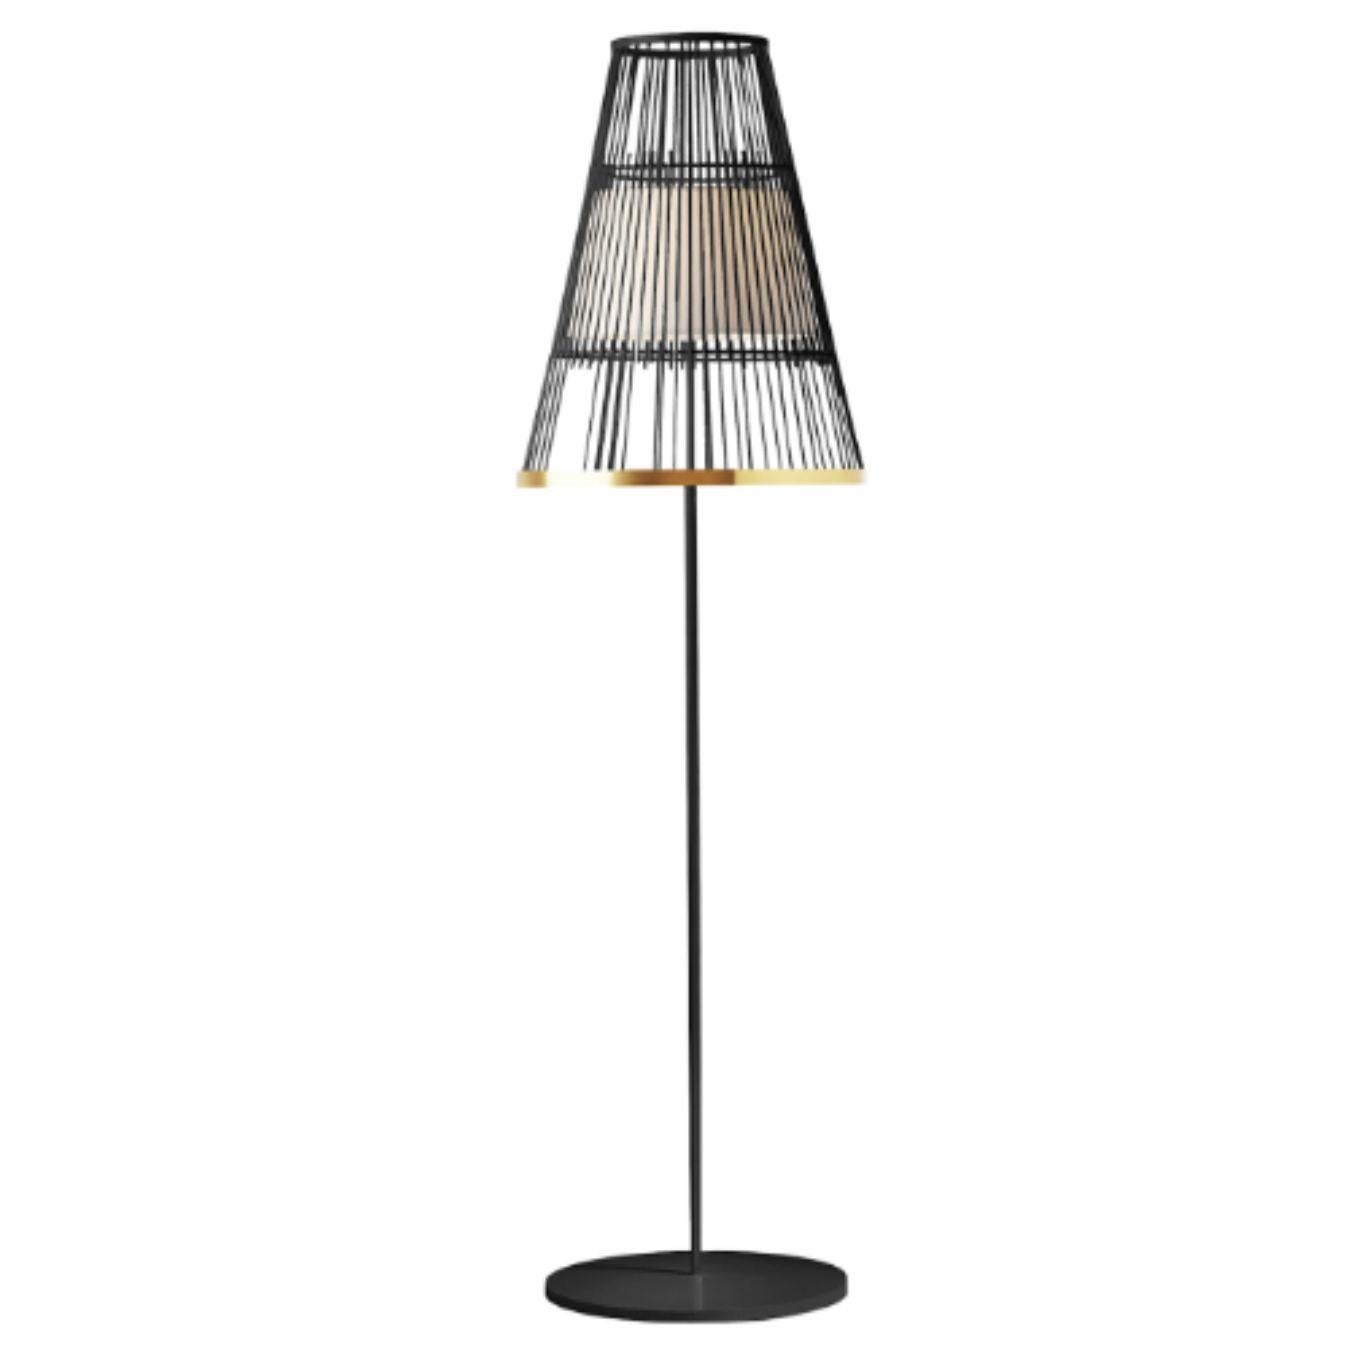 Black up floor lamp with brass ring by Dooq.
Dimensions: W 47 x D 47 x H 170 cm.
Materials: lacquered metal, polished or brushed metal, brass.
Abat-jour: cotton
Also available in different colors and materials.

Information:
230V/50Hz
E27/1x20W